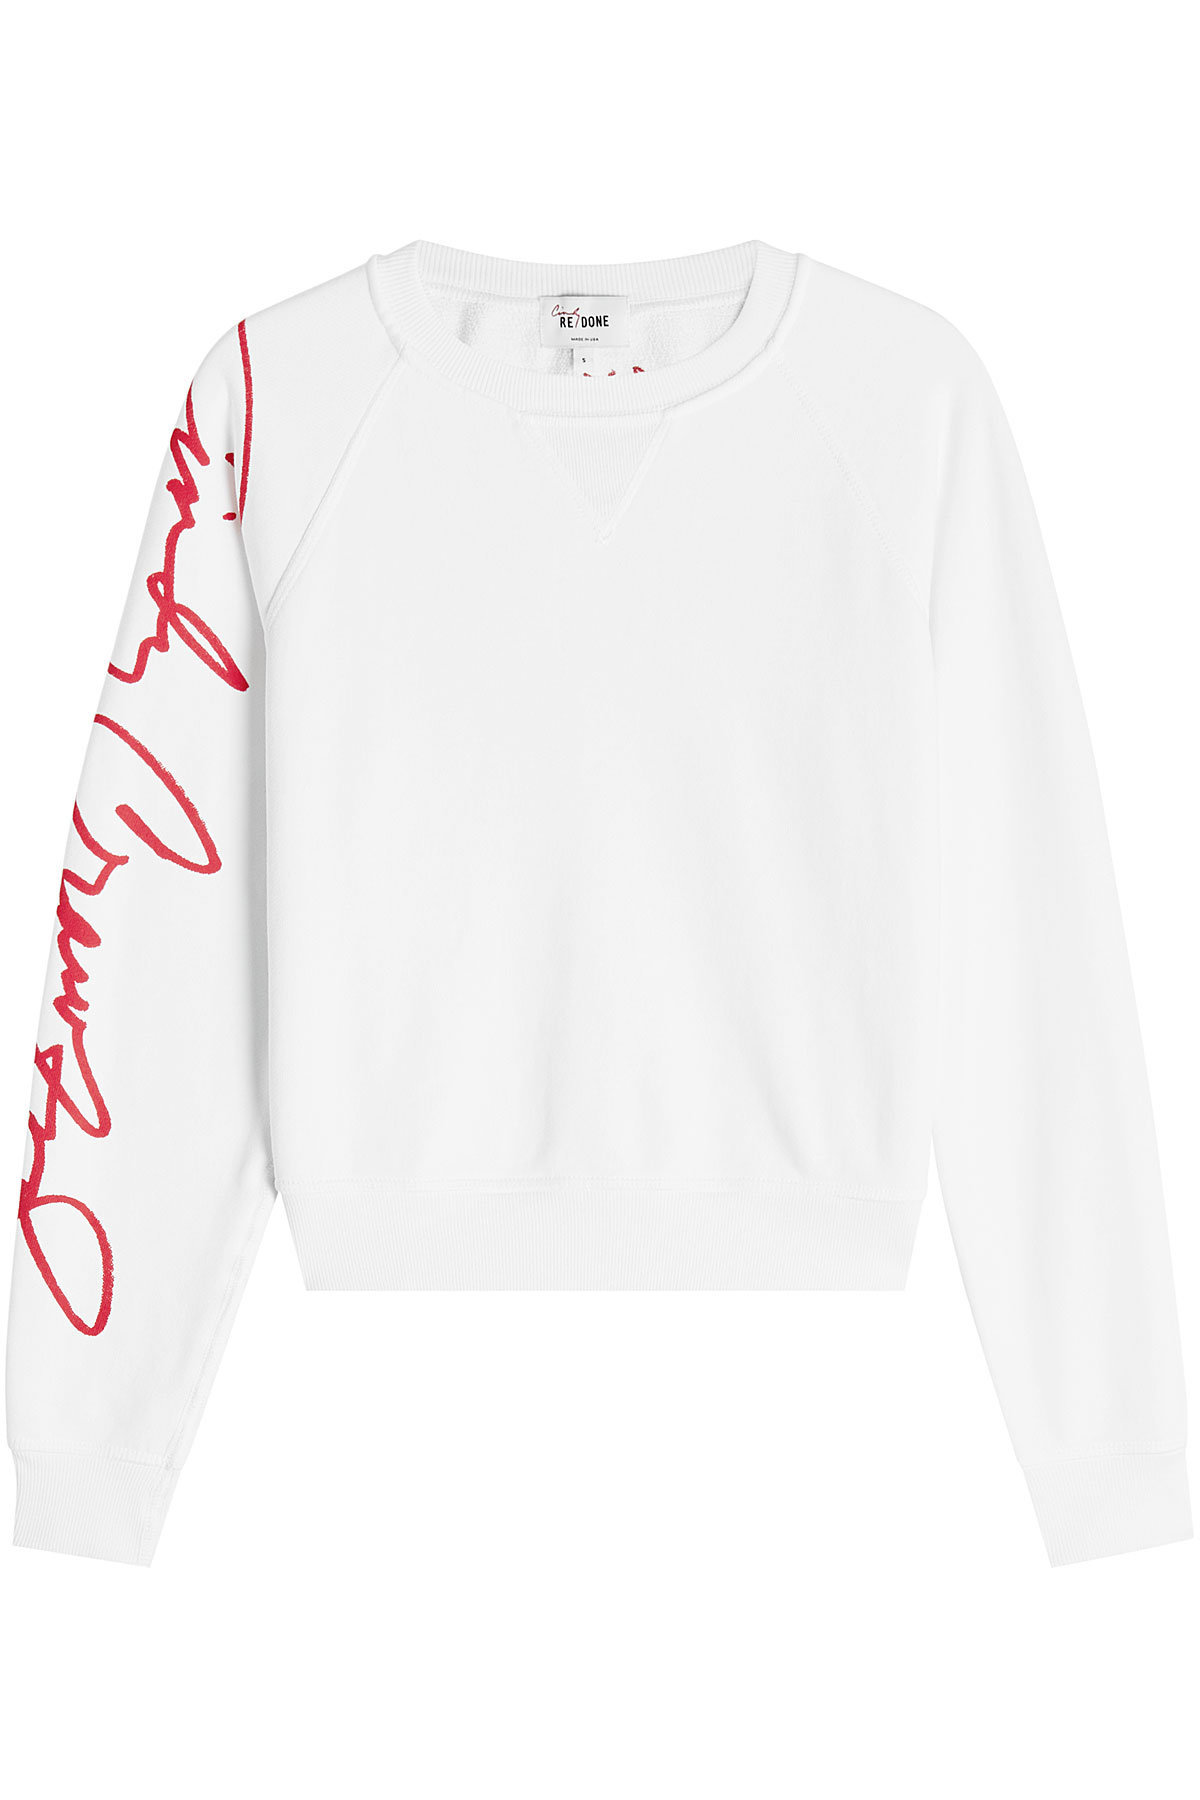 RE/DONE - Cindy Crawford Cotton Sweat Top